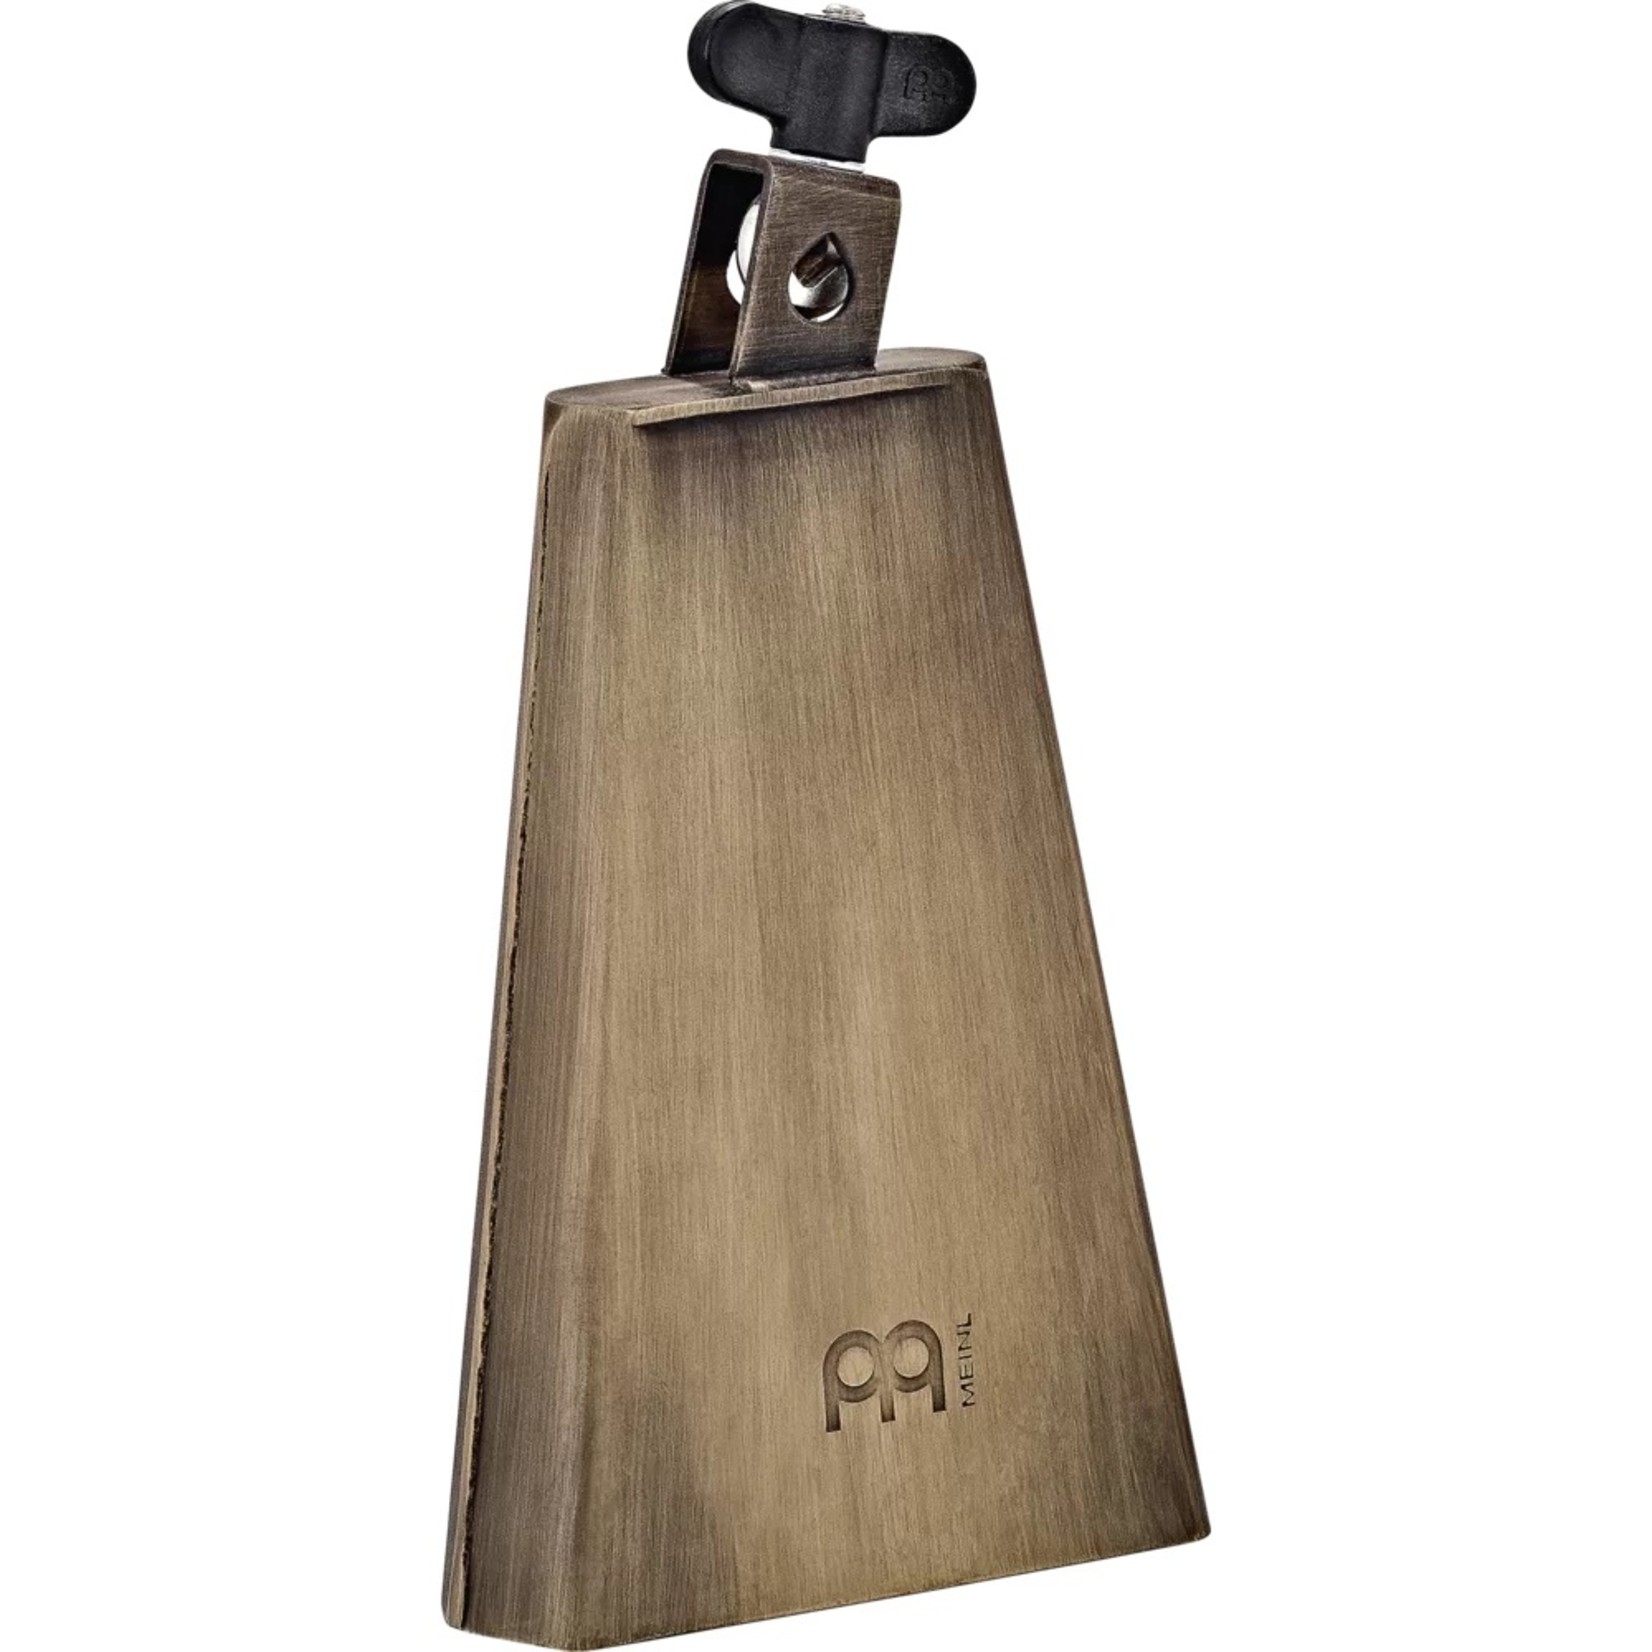 Meinl Meinl Artist Series - Mike Johnston Signature 3/4" cowbell, special steel alloy